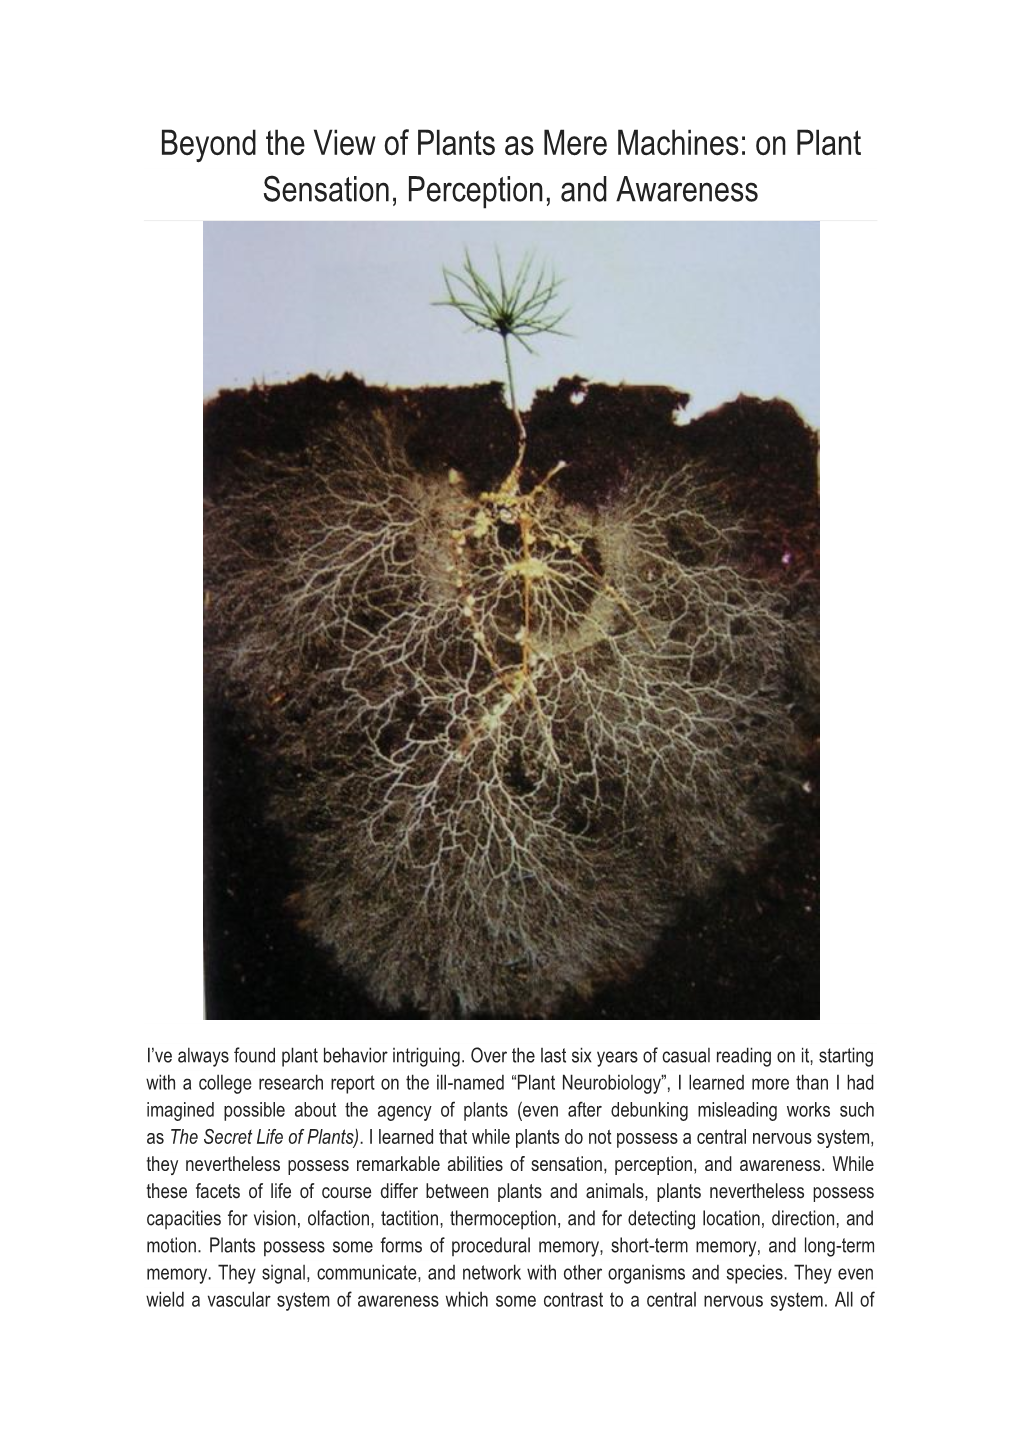 Beyond the View of Plants As Mere Machines: on Plant Sensation, Perception, and Awareness